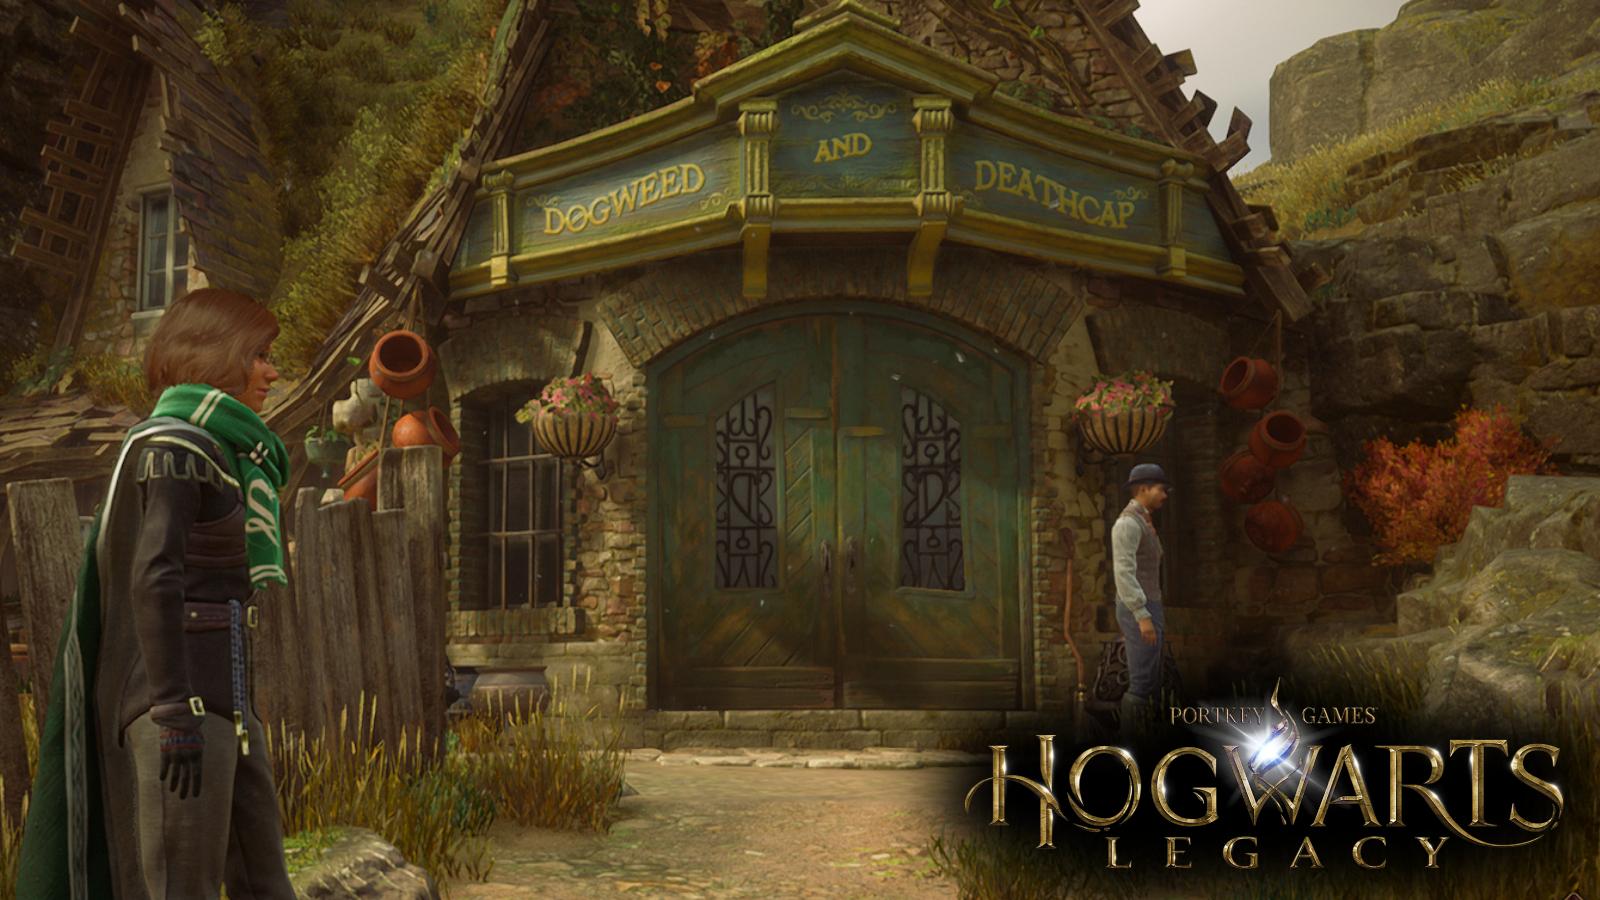 an image of Dogweed and Deathcap in Hogwarts Legacy